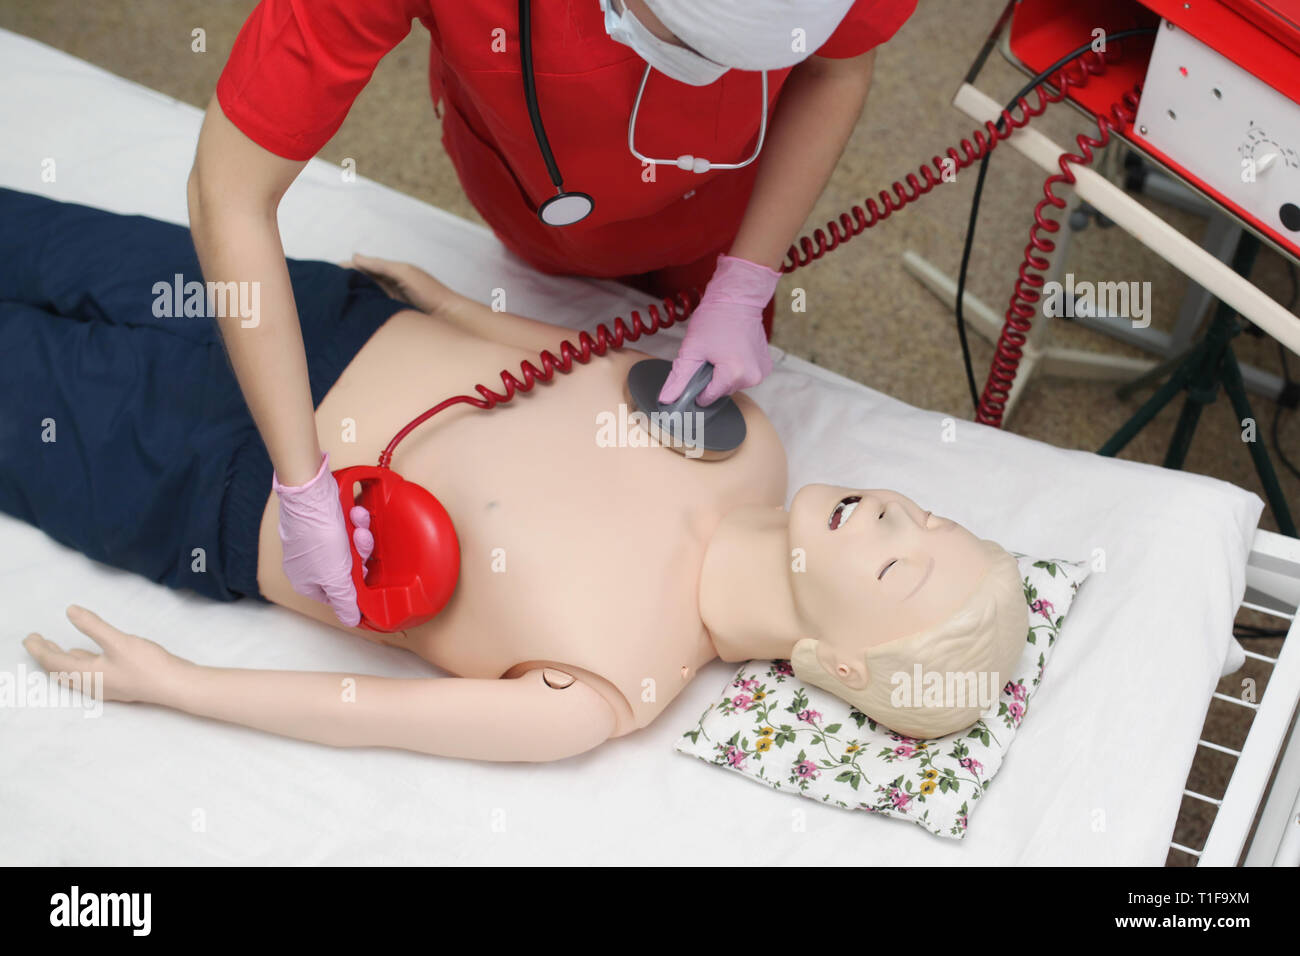 doctor girl defibrillate dummy Exam doctors but emergency resuscitation. concept of saving lives Stock Photo